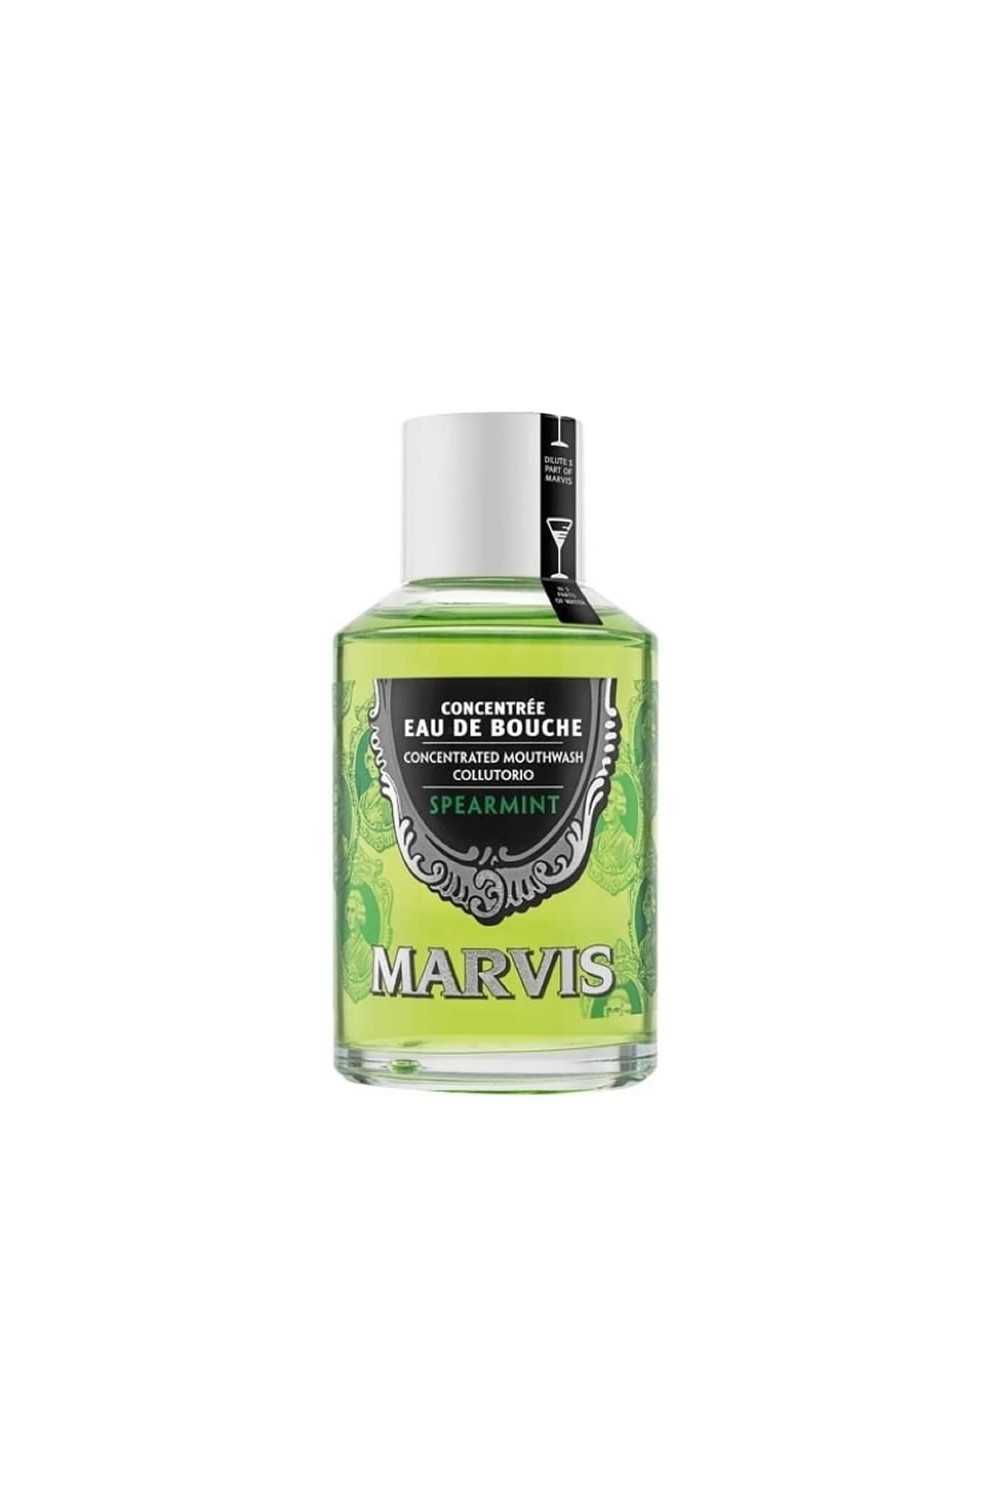 Marvis Spearmint Concentrated Mouthwash Collutorio 120ml